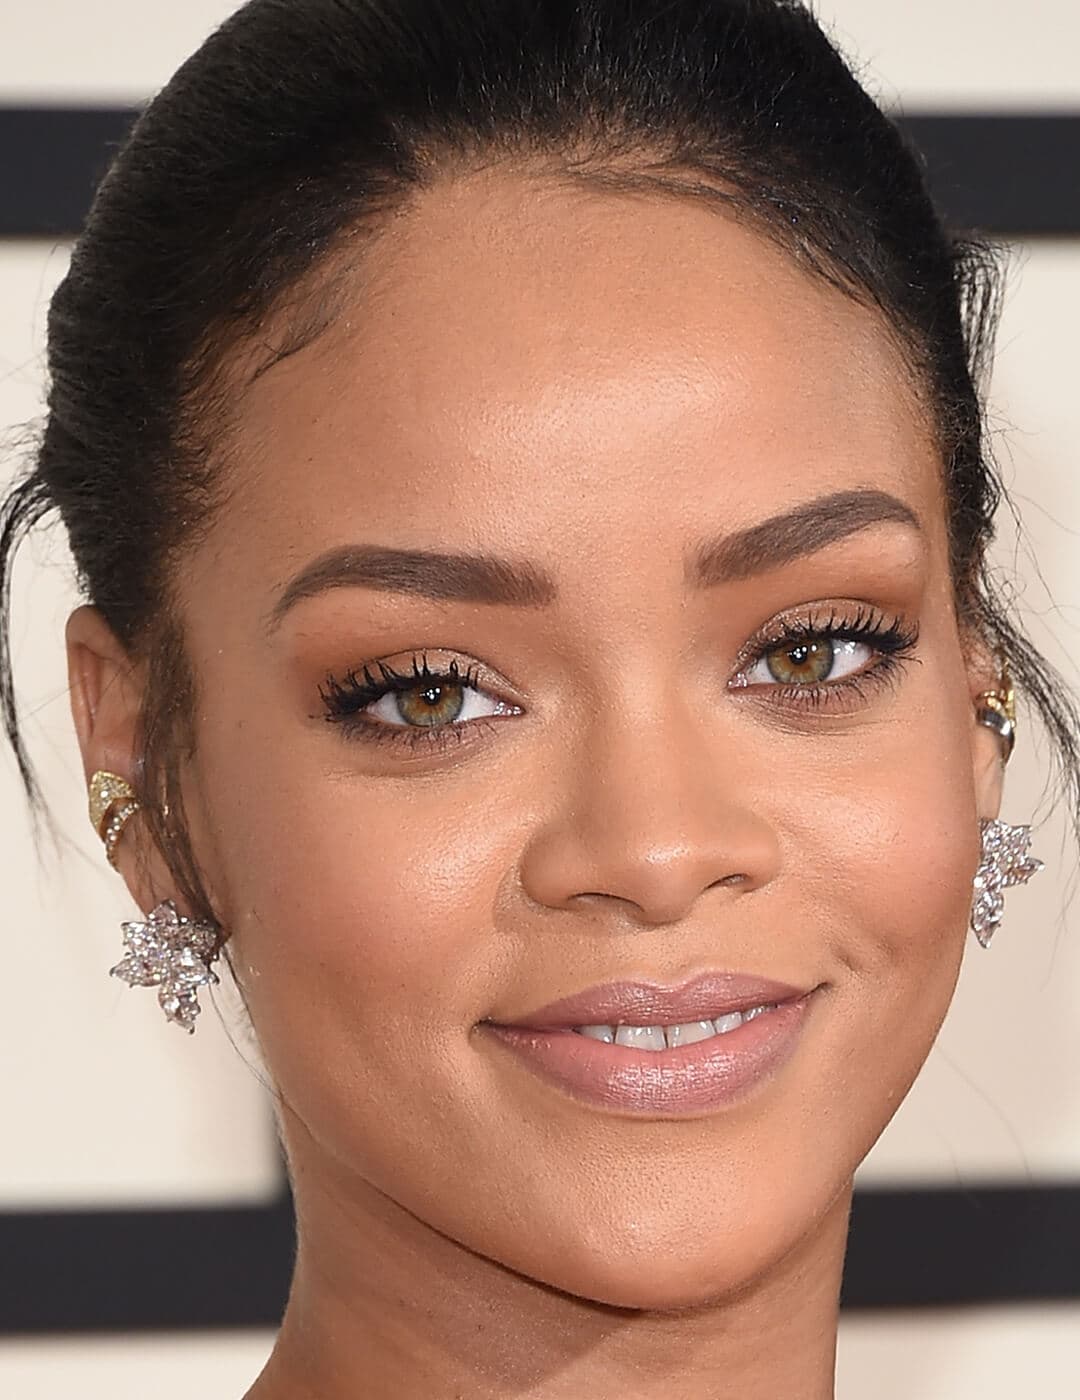 Rihanna looking glam in a neutral makeup look